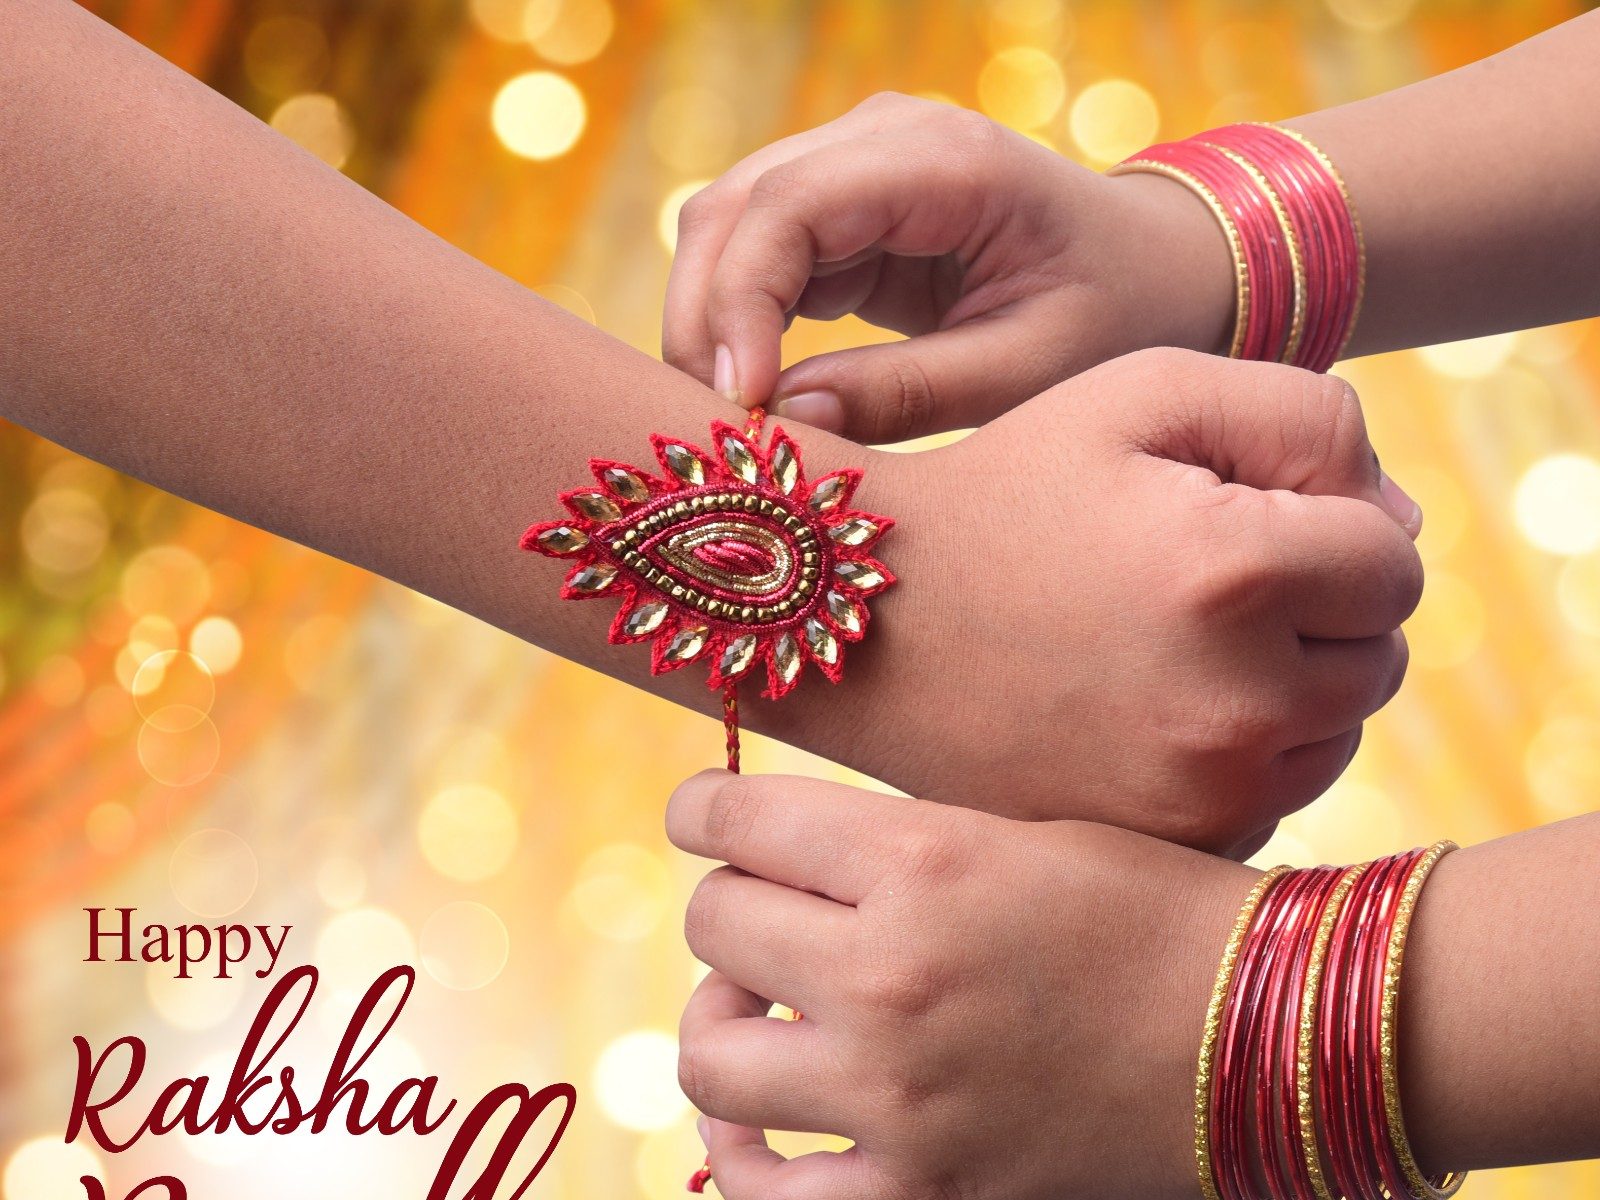 8 funny Rakhi gifts to tease your sister – Bigsmall.in